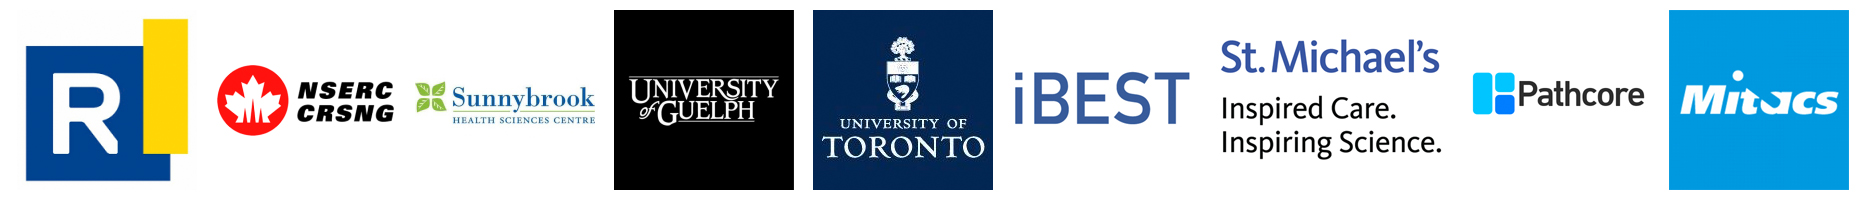 Logos of lab partners, including Ryerson, NSERC, Sunnybrook, University of Guelph, University of Toronto, iBest, St. Michael's, Pathcore, and Mitacs.